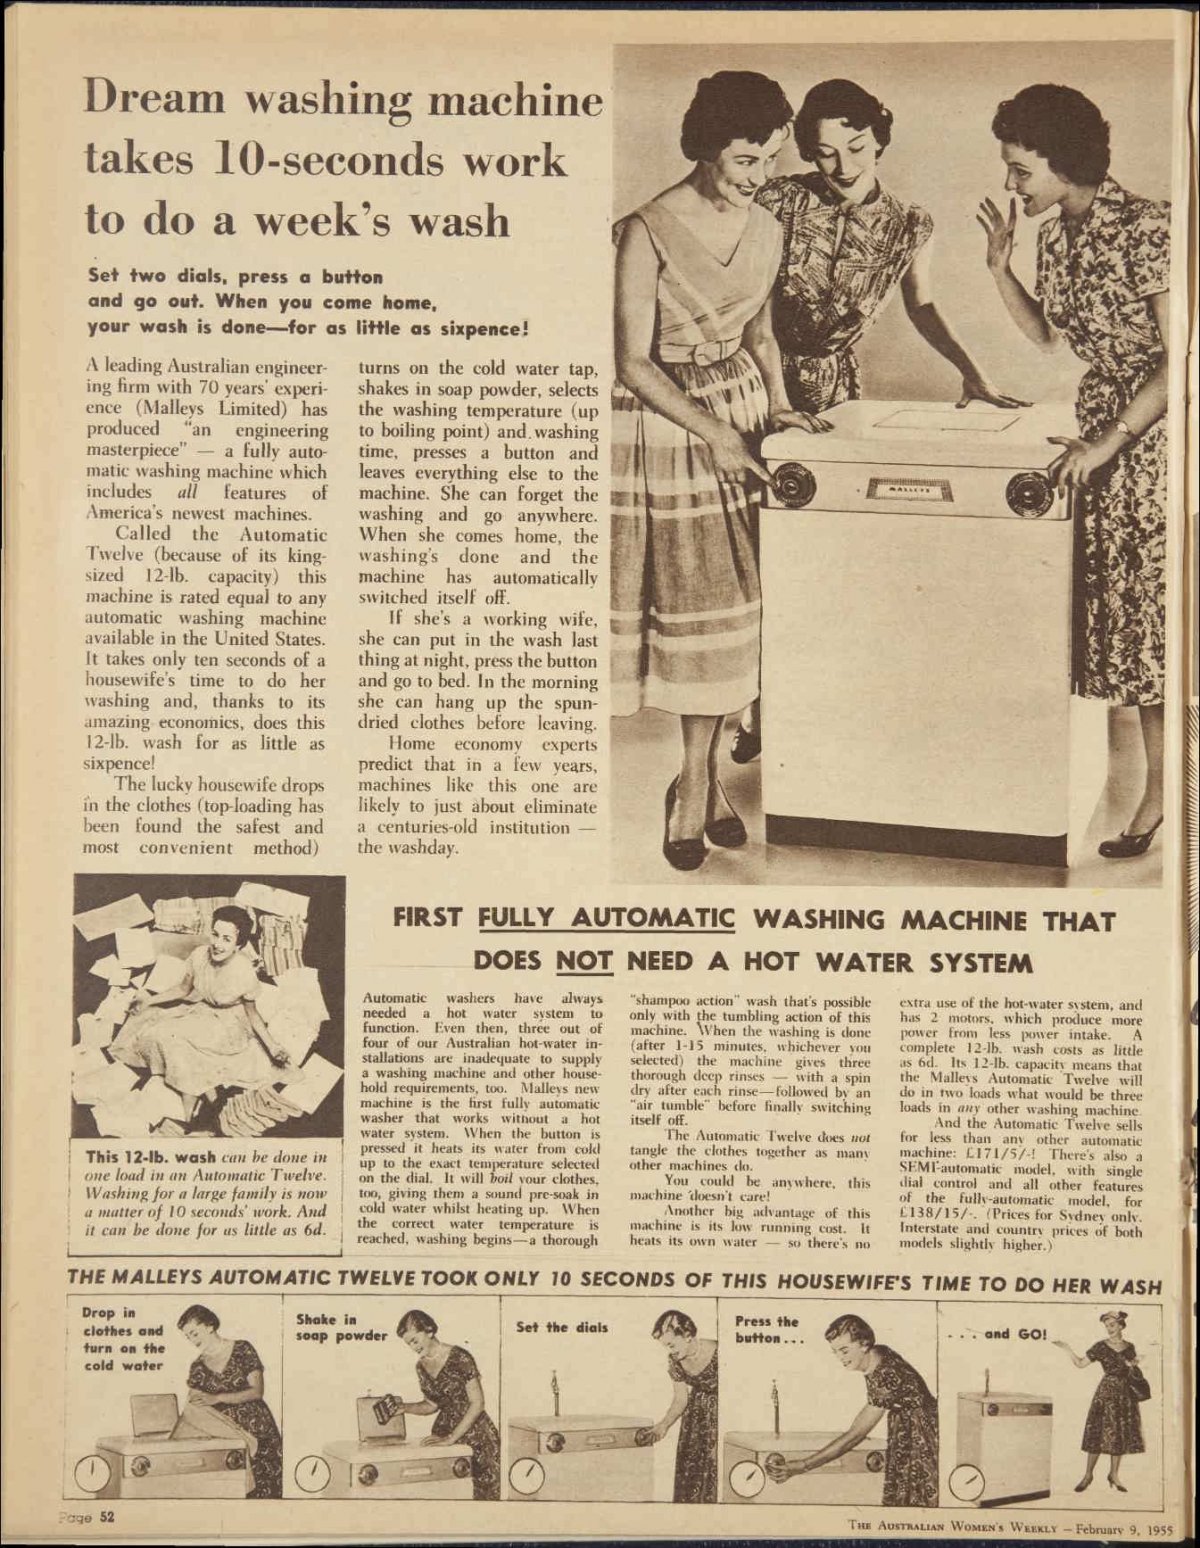 A sepia toned newspaper page. It is an advertisement for a new washing machine. The main image shows three women standing around the appliance smiling. The main headline reads "DREAM WASHING MACHING TAKES 10-SECONDS WORK TO DO A WEEK'S WASH"